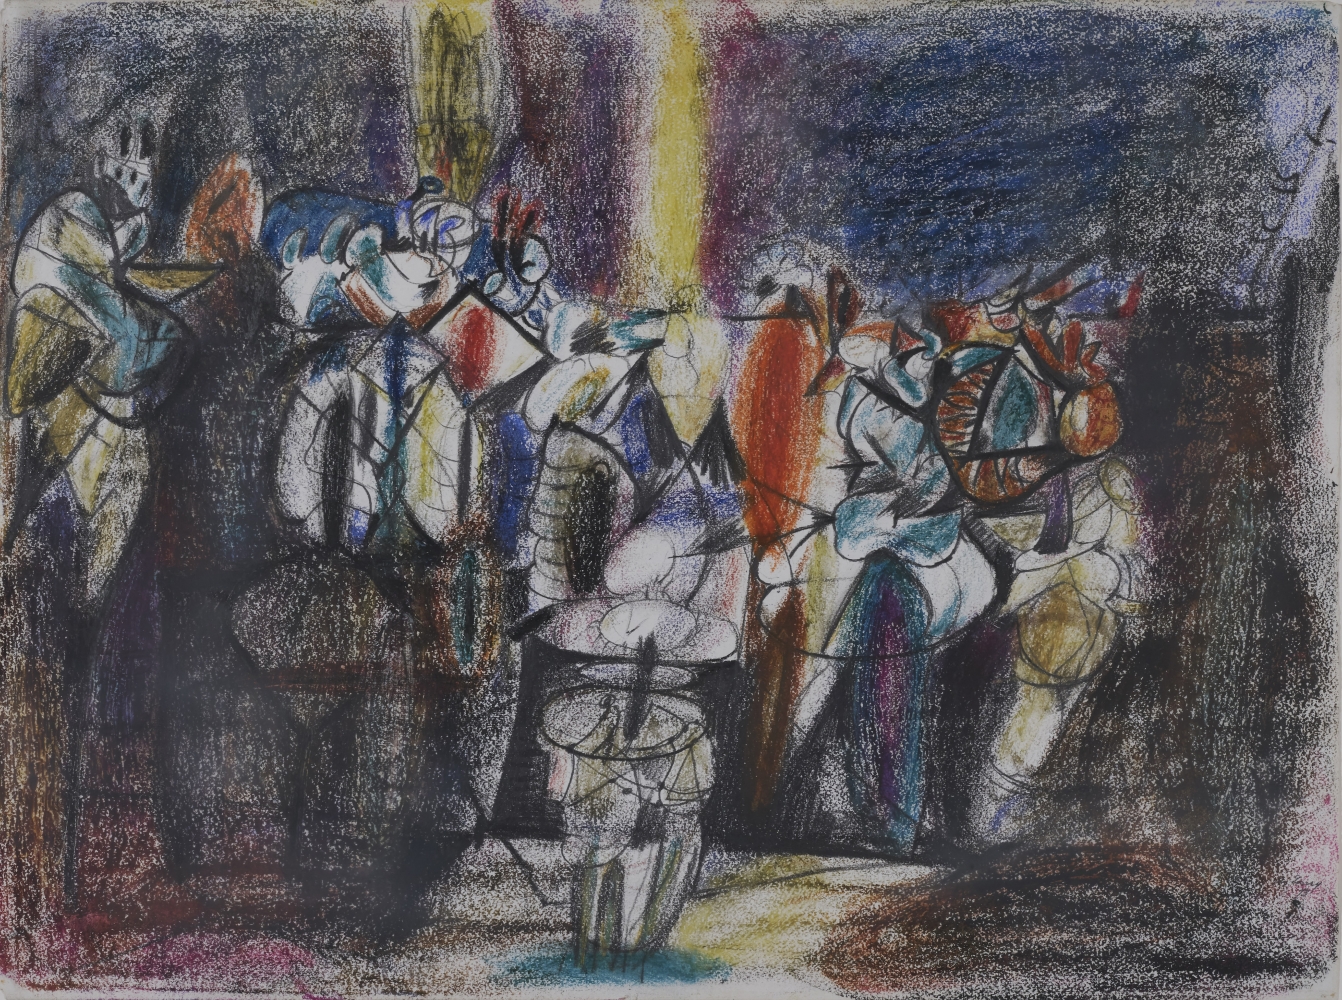 Carnival, 1943, crayon and graphite pencil on paper, 20 x 27 in. (50.8 x 68.6 cm). Collection Jack and Frances Levy, New York. Photo: Jerry L. Thompson. [AGCR: D1008]